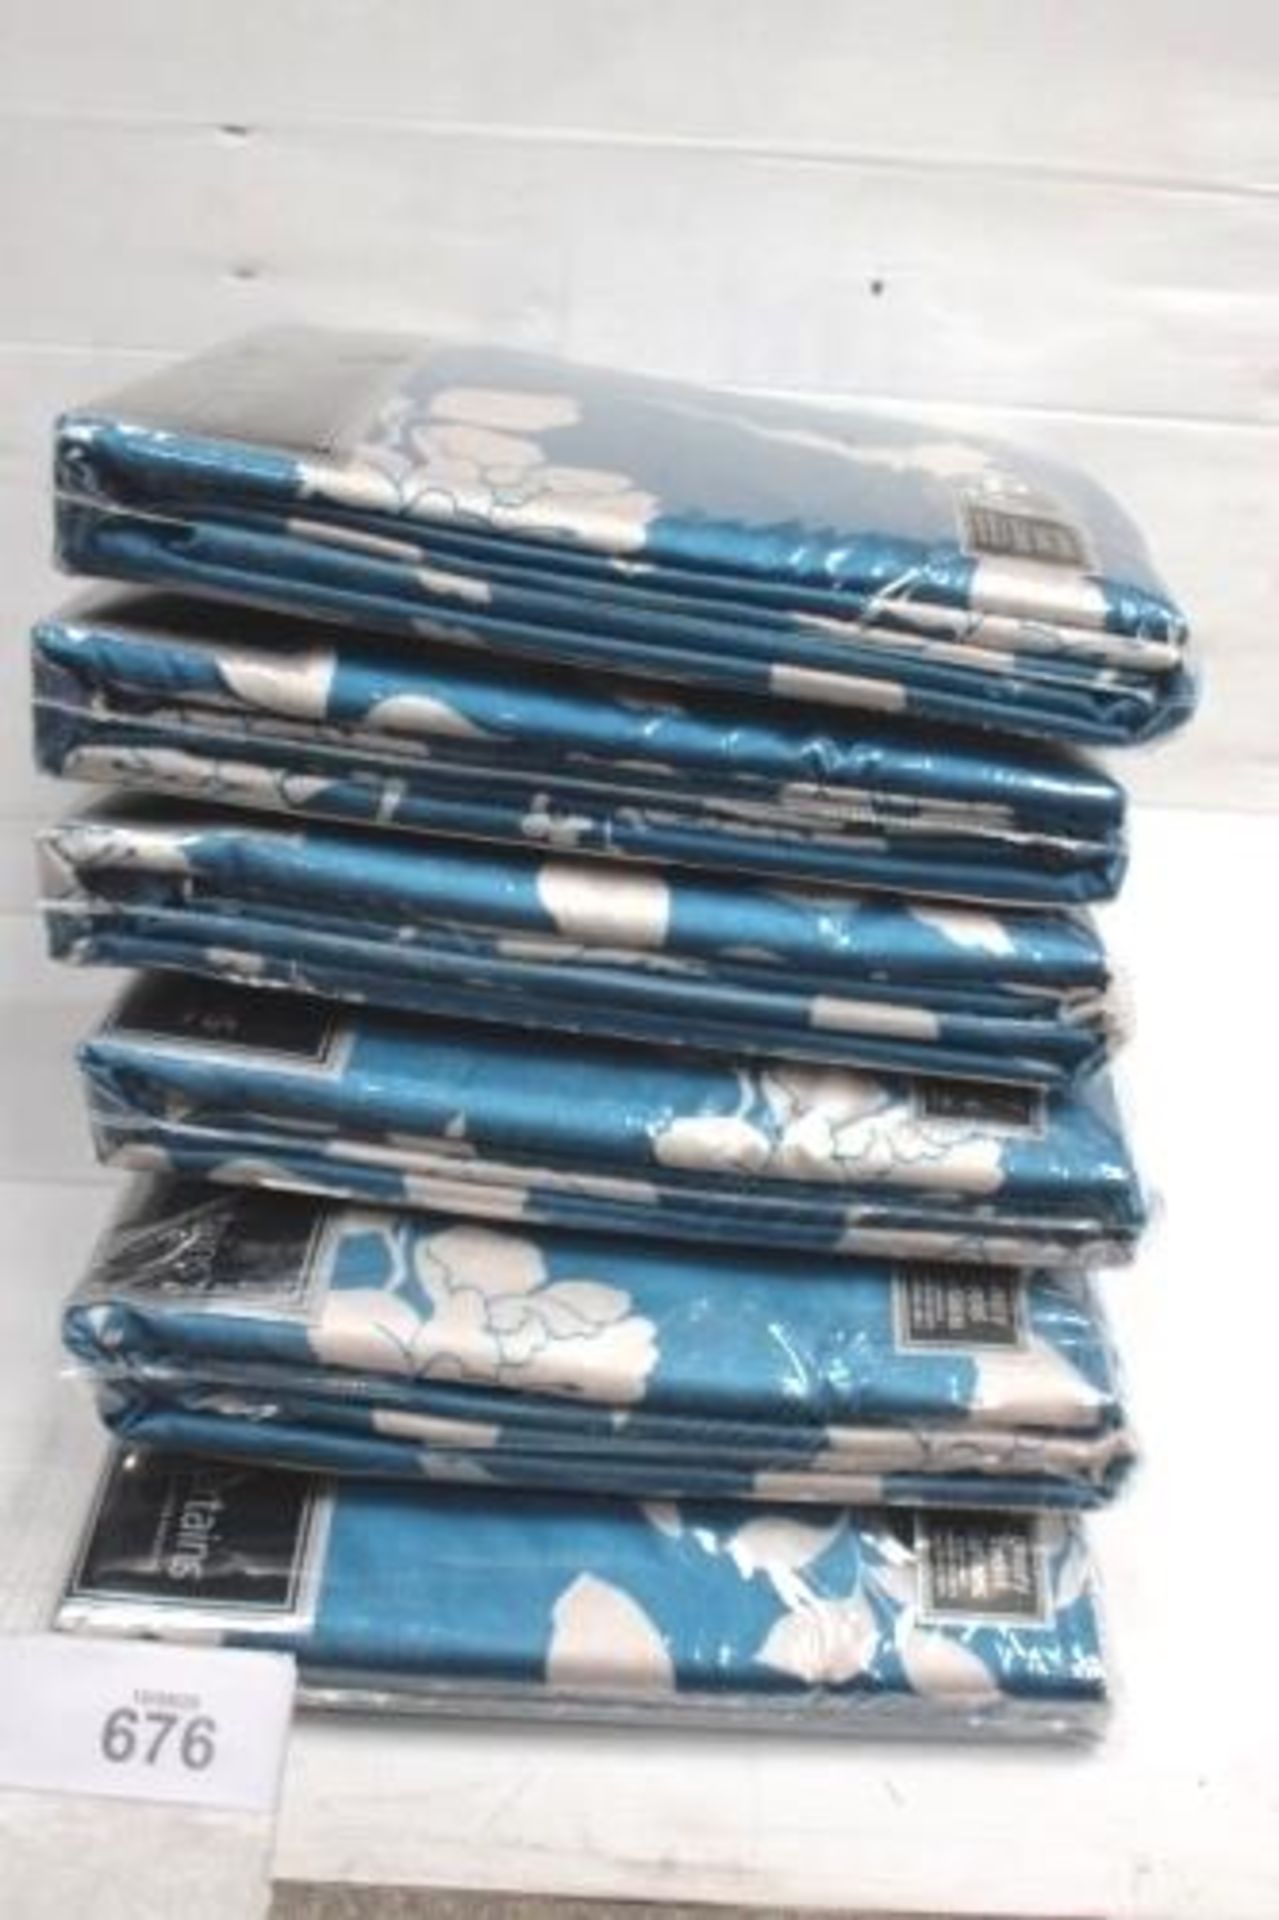 6 x pairs of Rosenthal Curtina teal lined eyelet silhouette floral curtains, size 168 x 229cm -